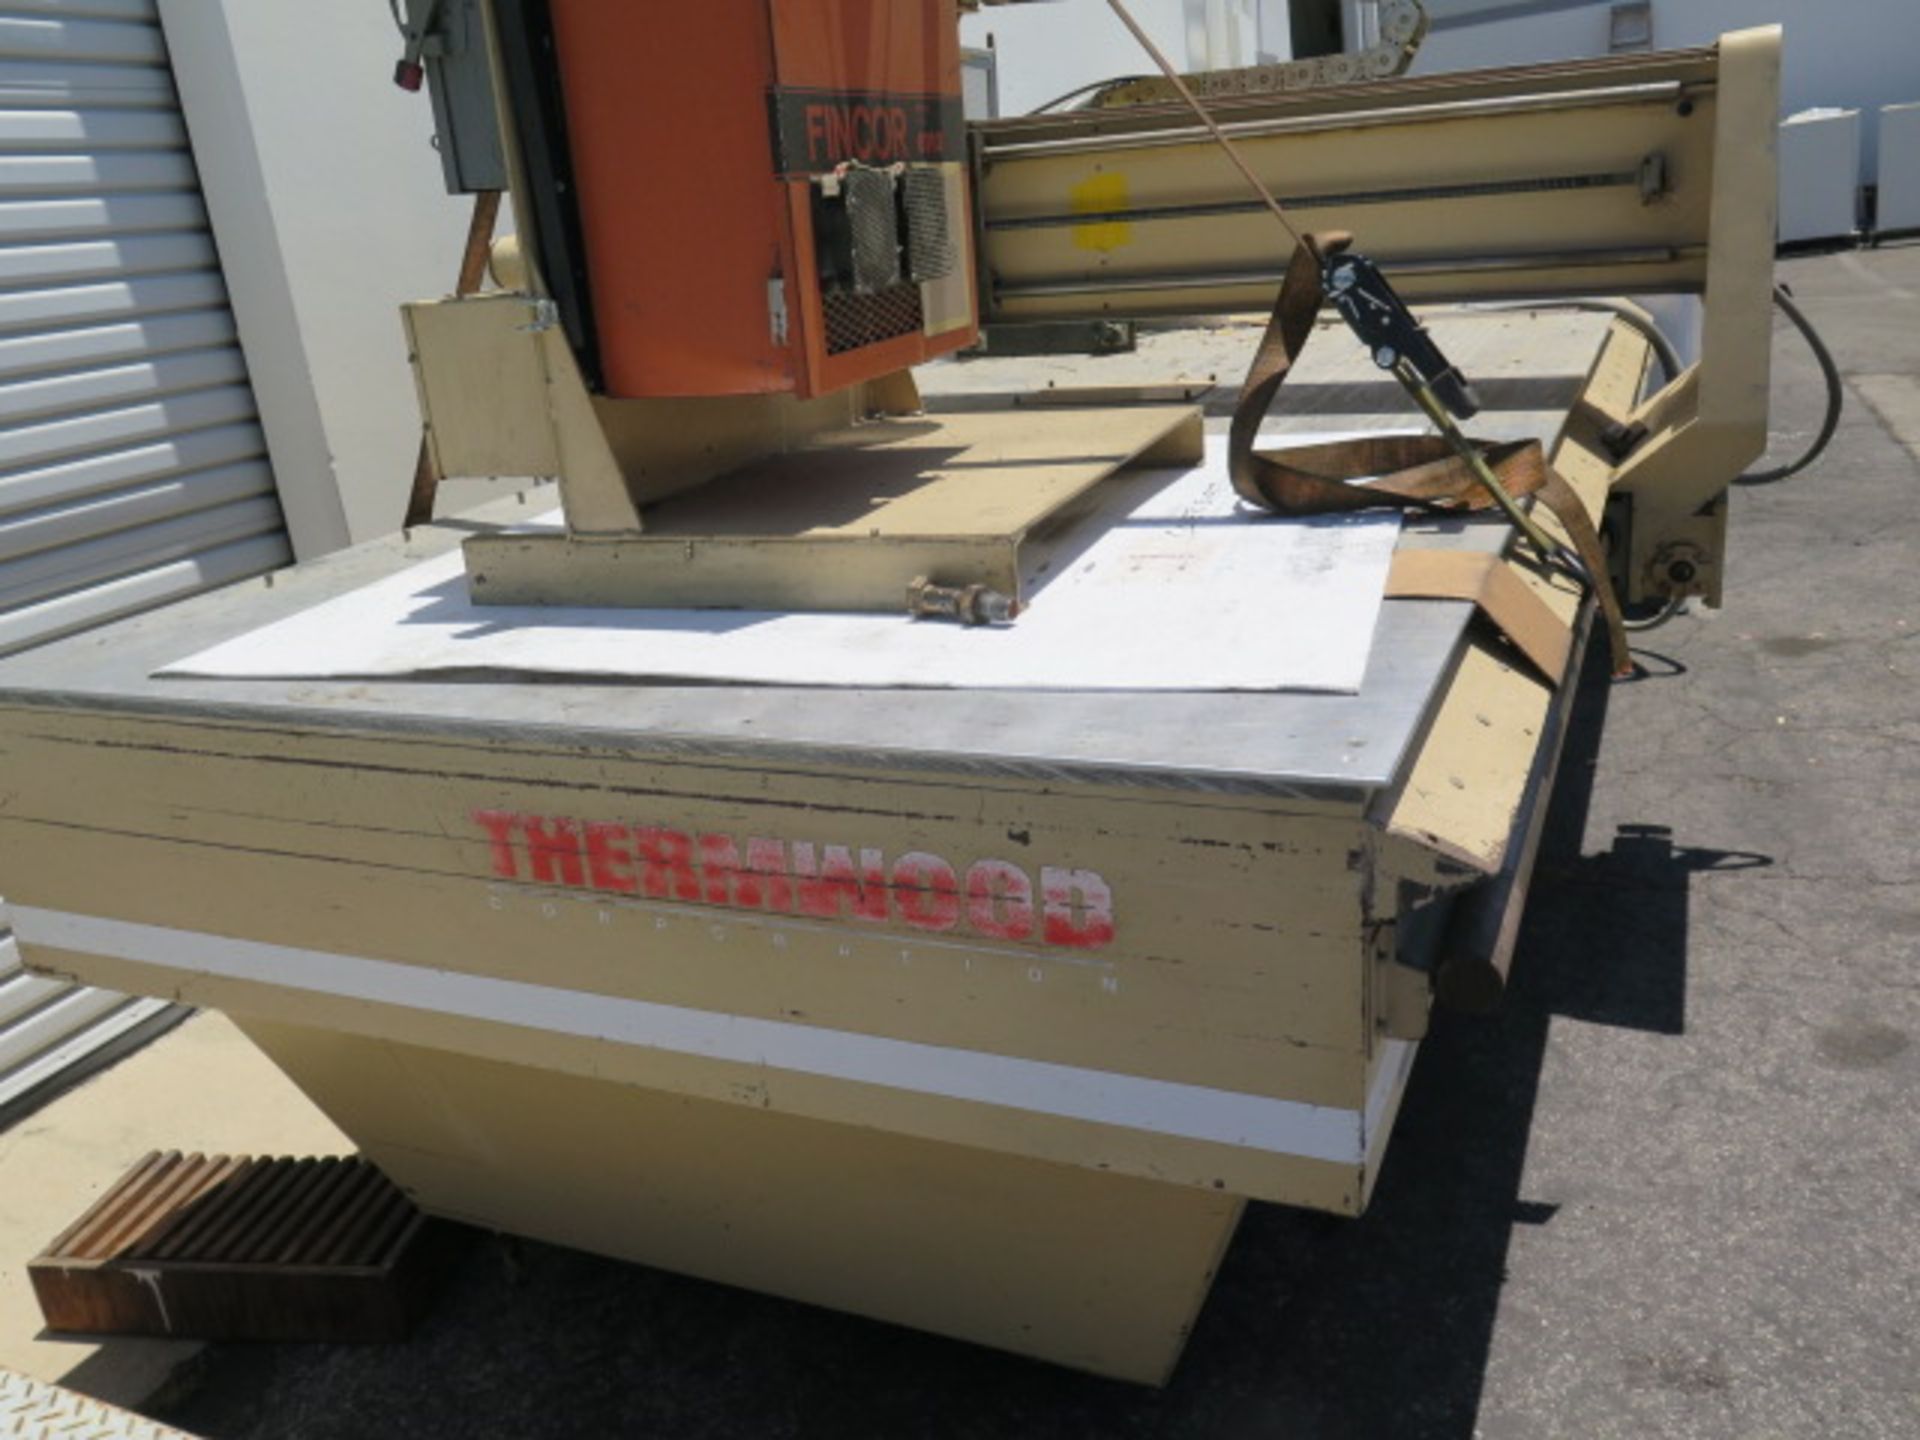 Thermwood "Cartesian 5" mdl. C50 CNC Router s/n 120PA0017070784 (SOLD AS-IS - NO WARRANTY) - Image 9 of 10